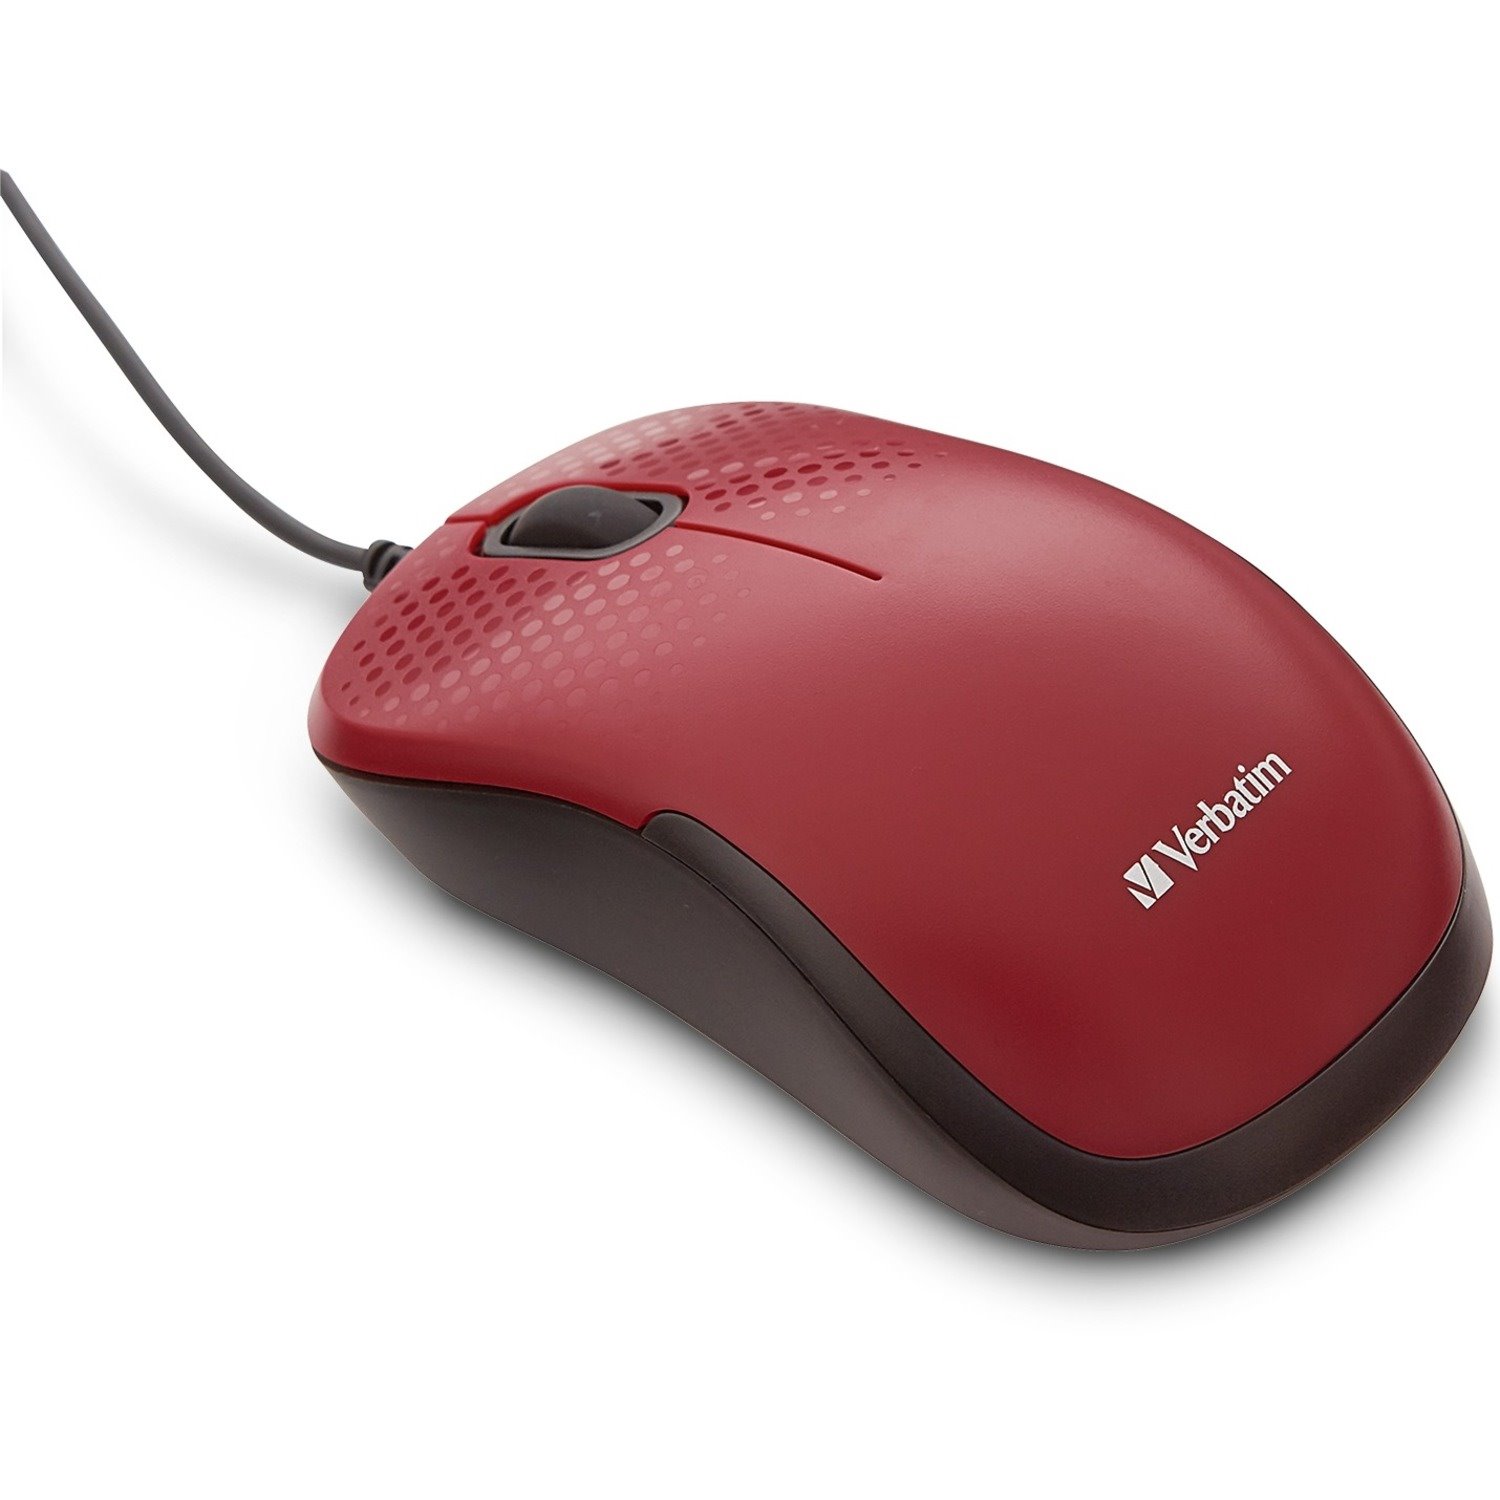 Verbatim Silent Corded Optical Mouse - Red